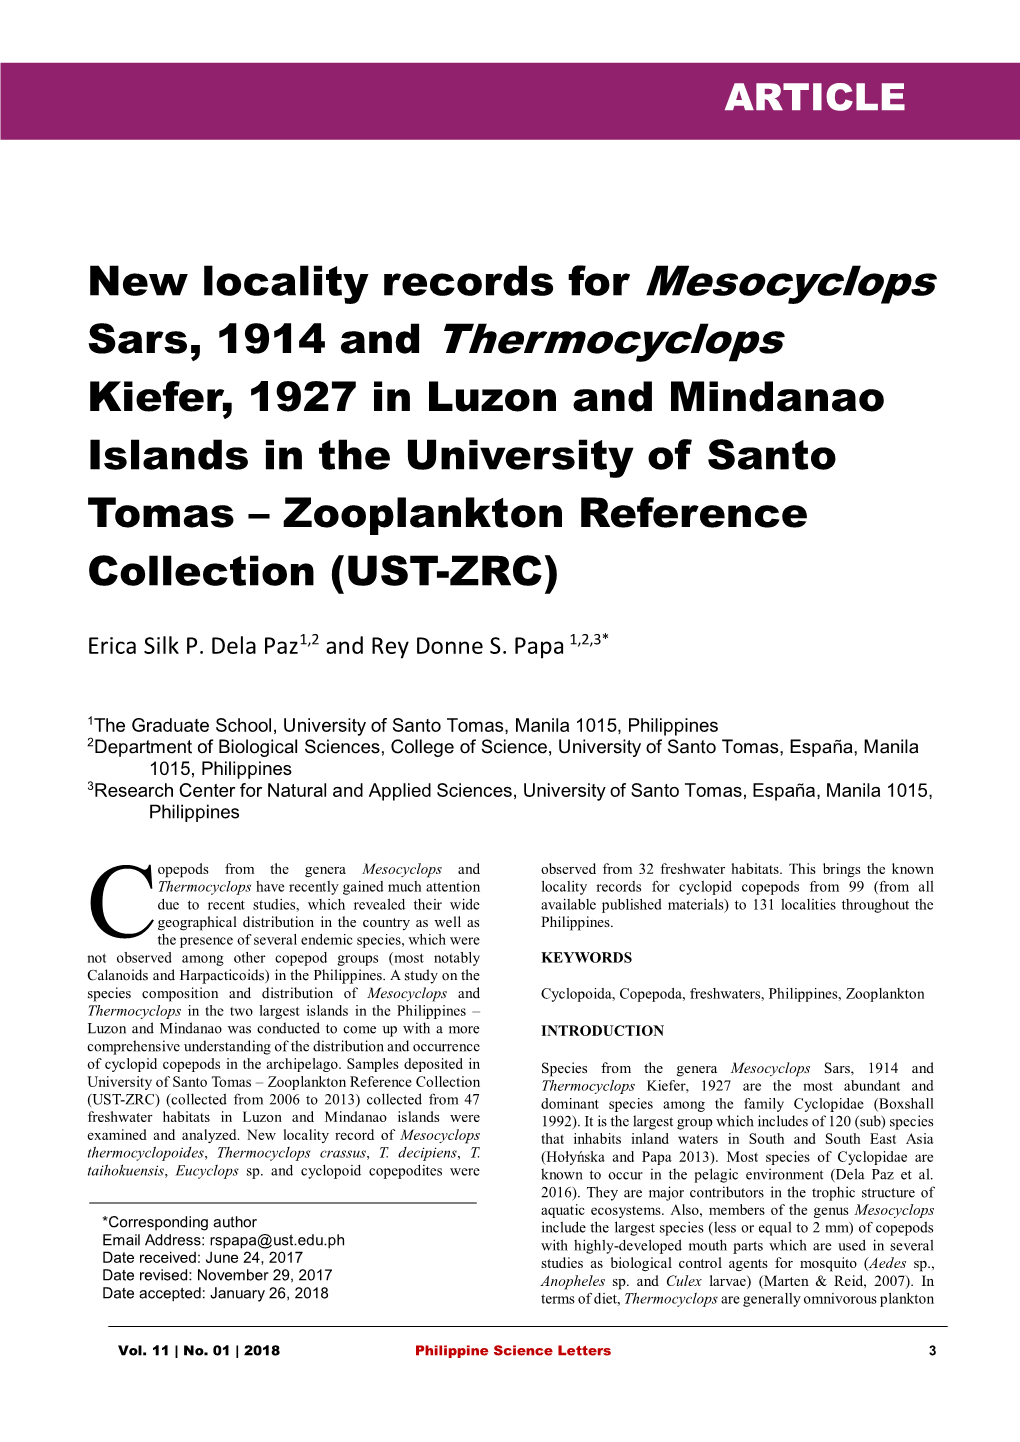 New Locality Records for Mesocyclops Sars, 1914 and Thermocyclops